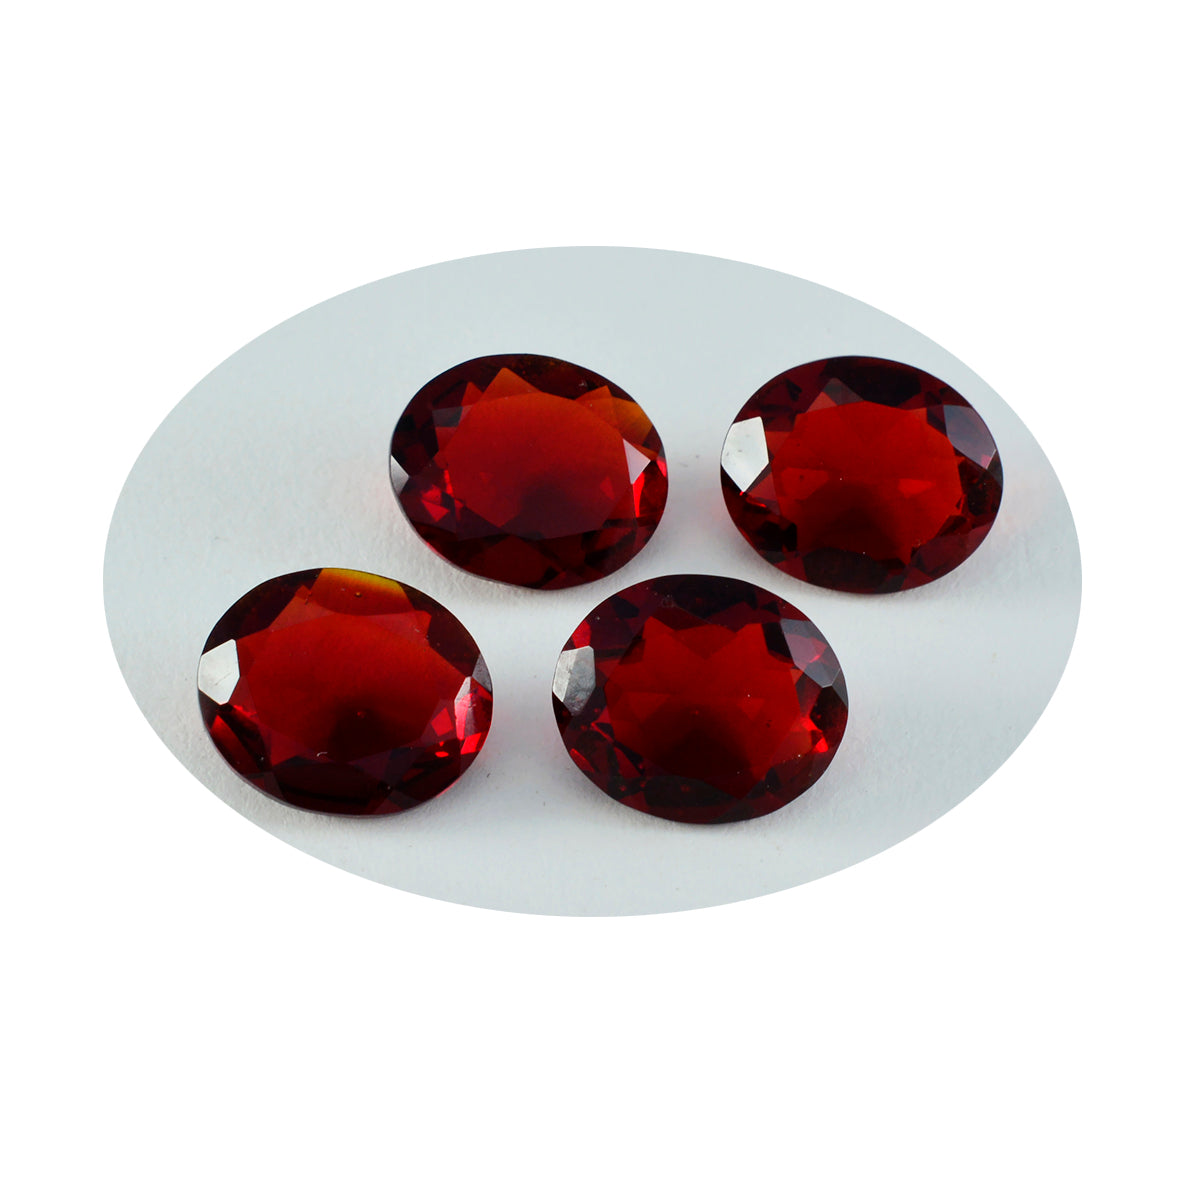 Riyogems 1PC Red Ruby CZ Faceted 9x11 mm Oval Shape great Quality Loose Gem